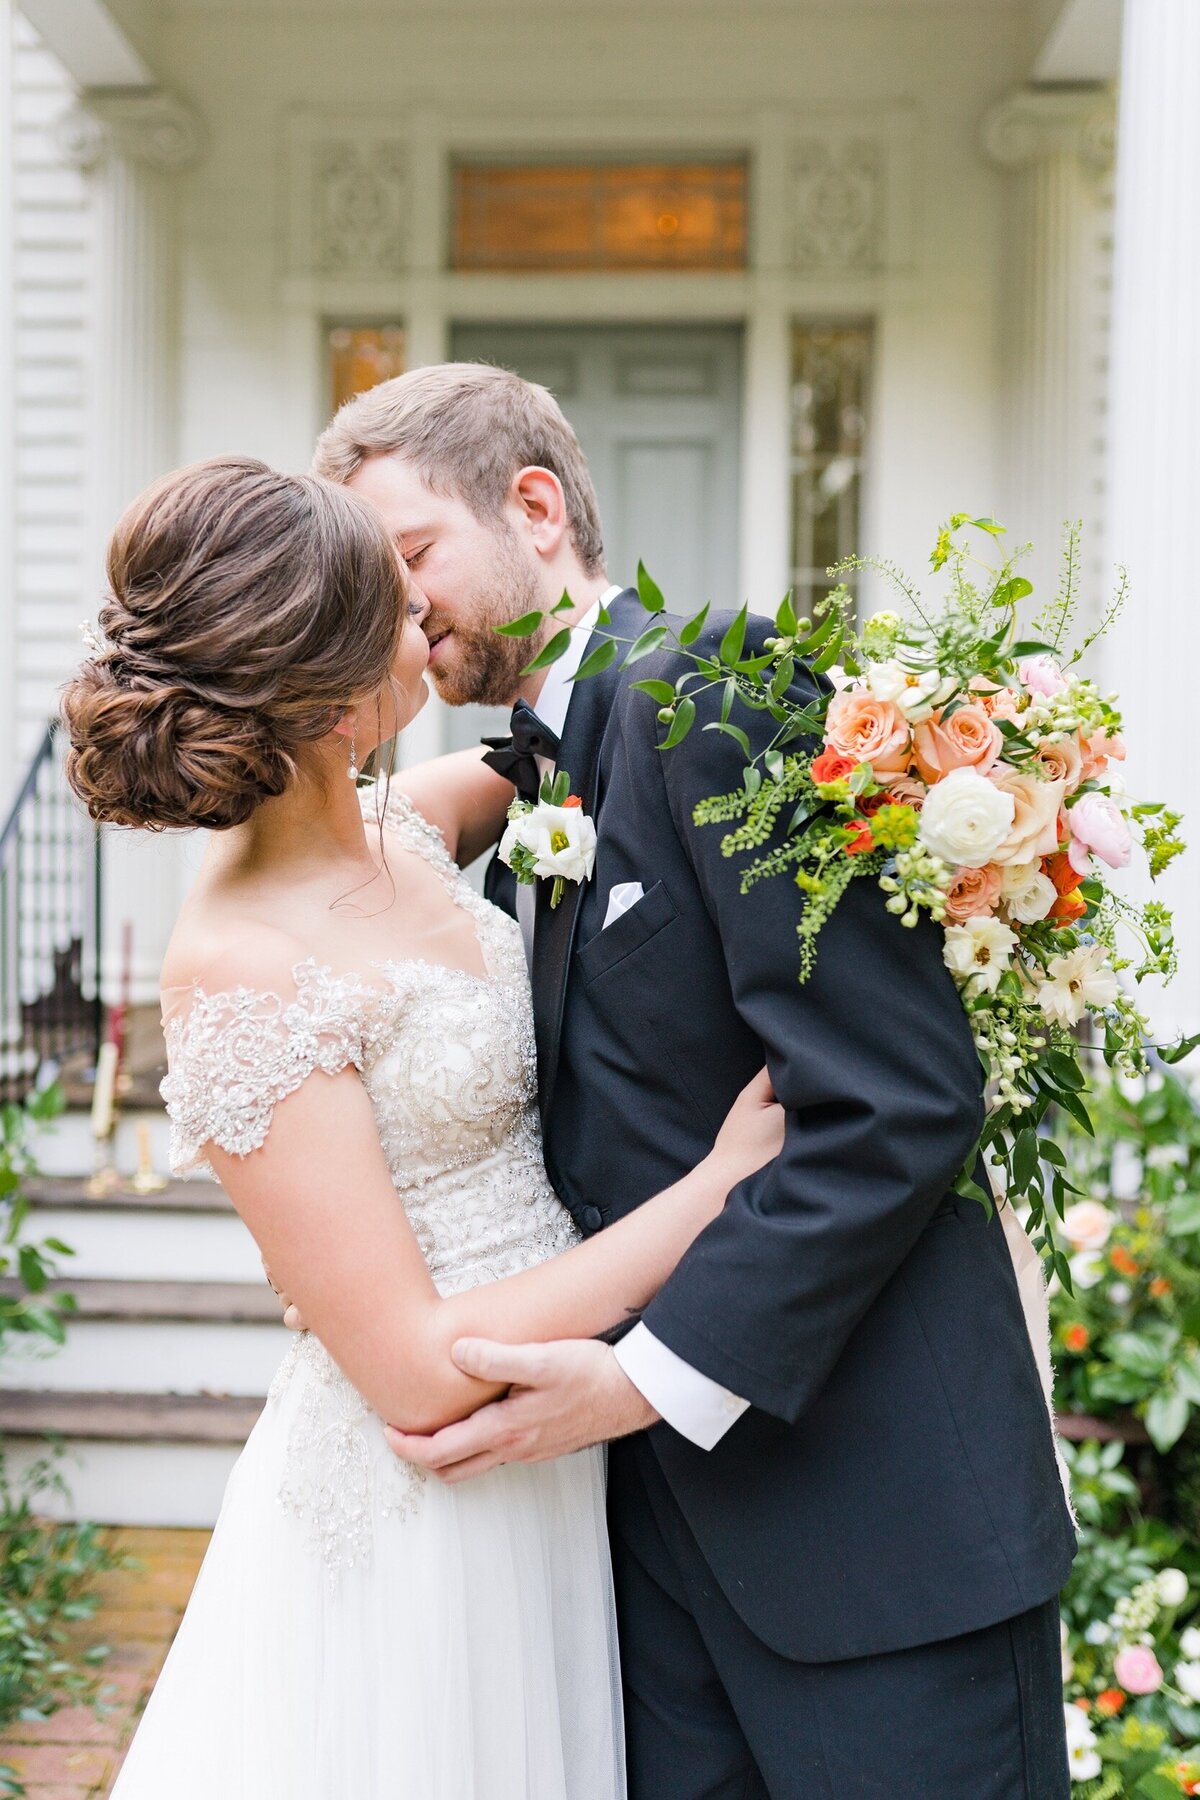 A newly married couple shares a kiss in front of the historic Holt House in Lexington, NC near Charlotte, NC.